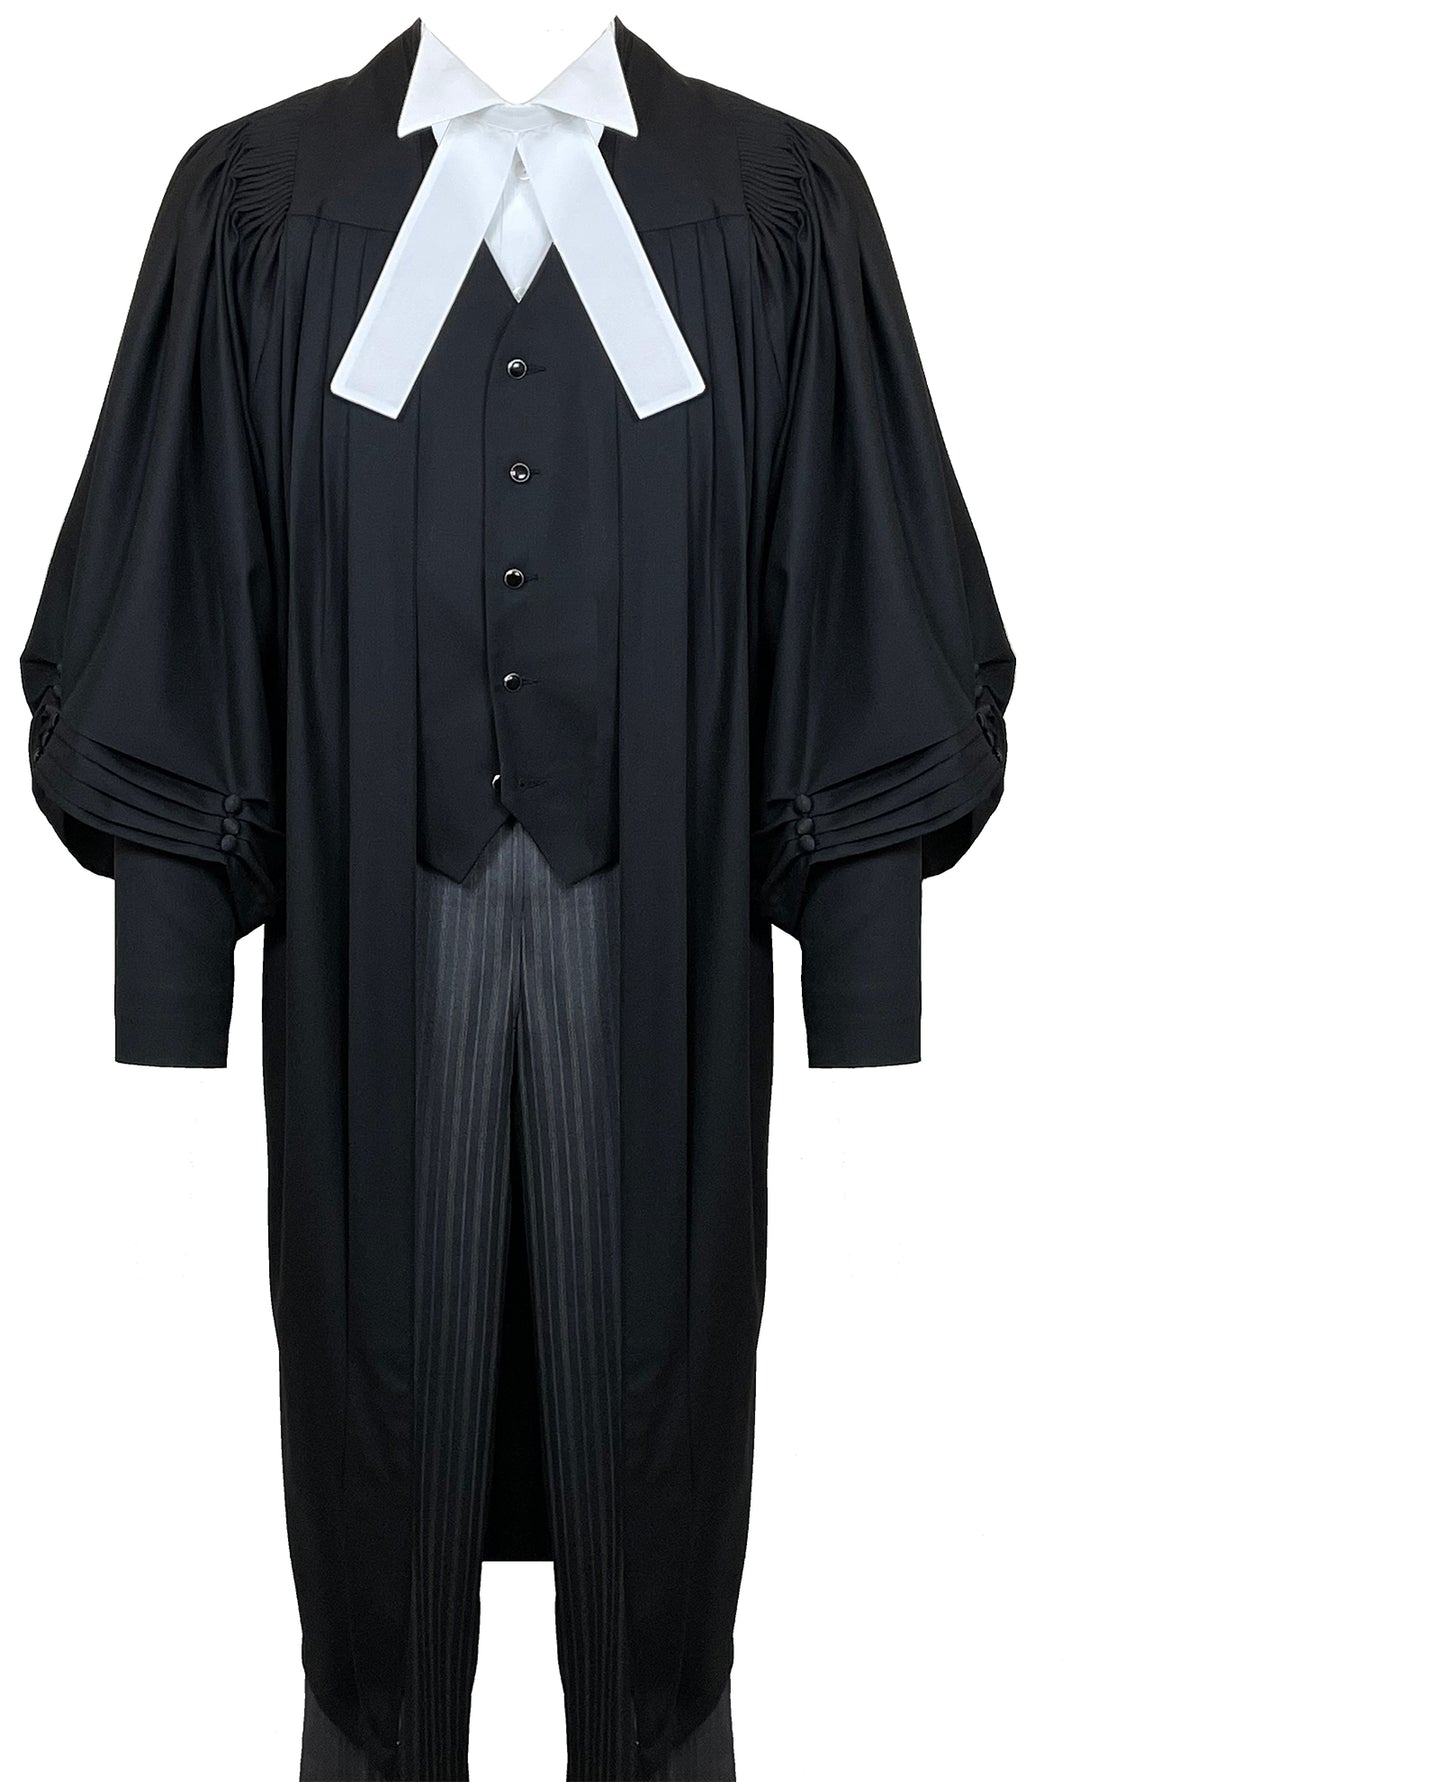 Barrister's Robe